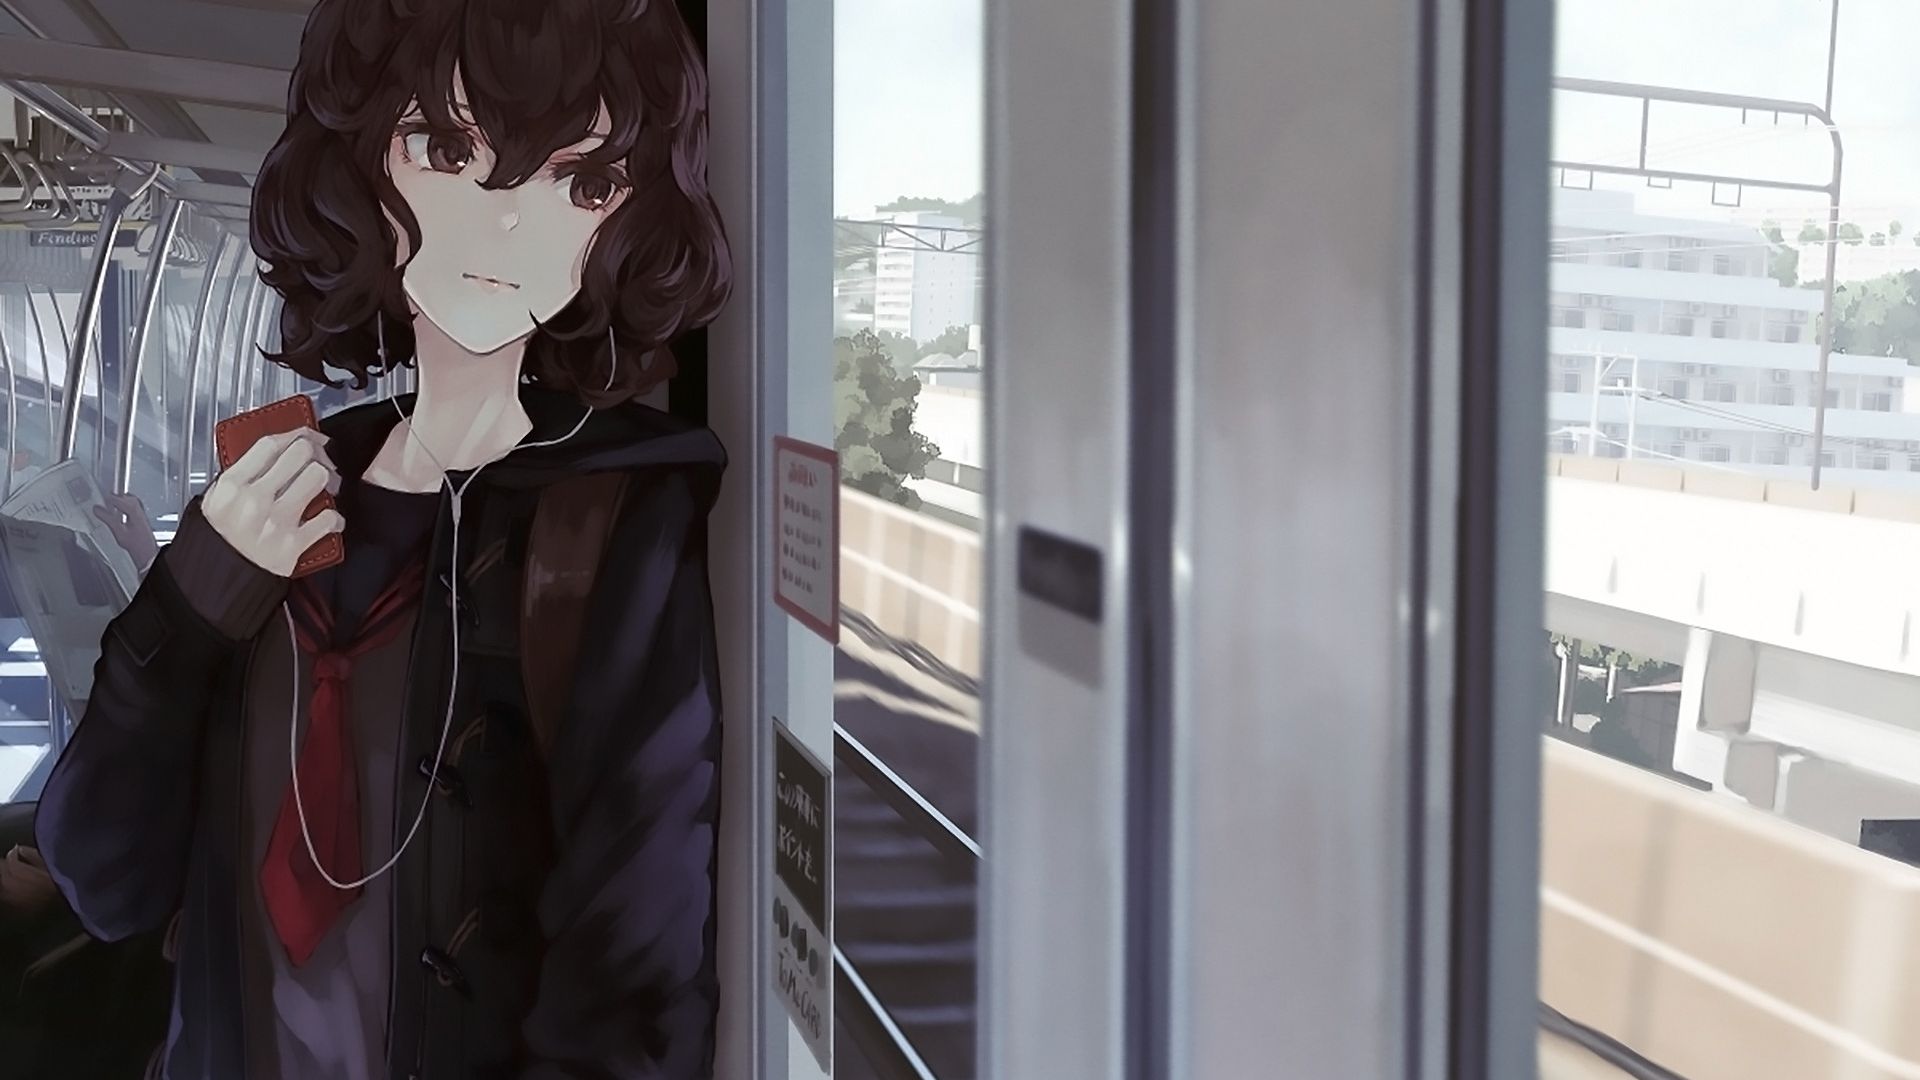 Desktop Wallpaper Short, Curly Hair, Anime Girl, Train, Hd Image, Picture,  Background, C54ee1